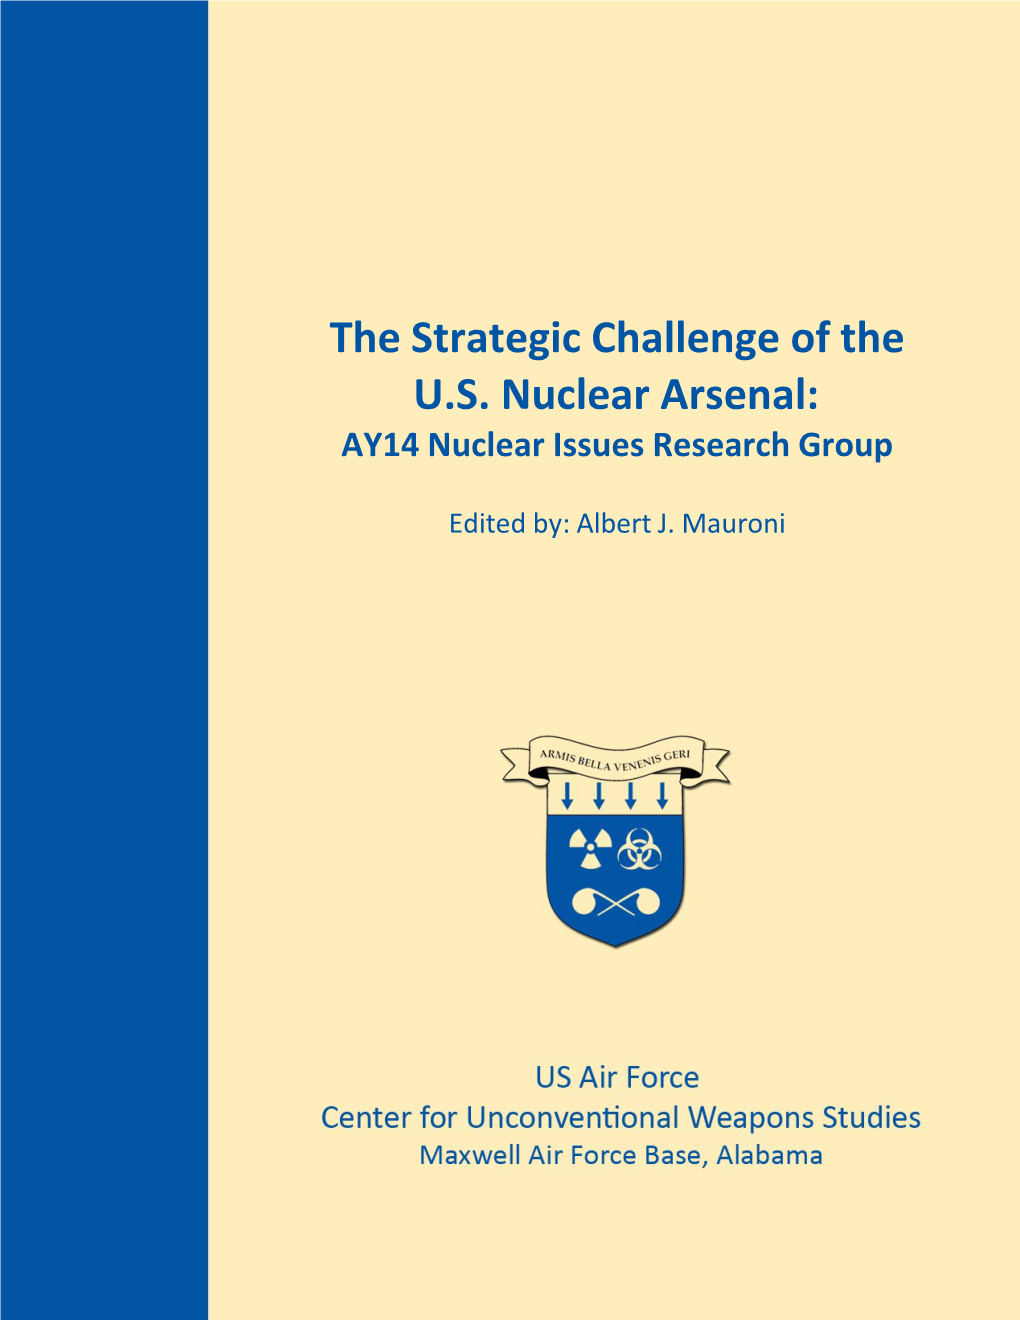 The Strategic Challenge of the U.S. Nuclear Arsenal: AY14 Nuclear Issues Research Group